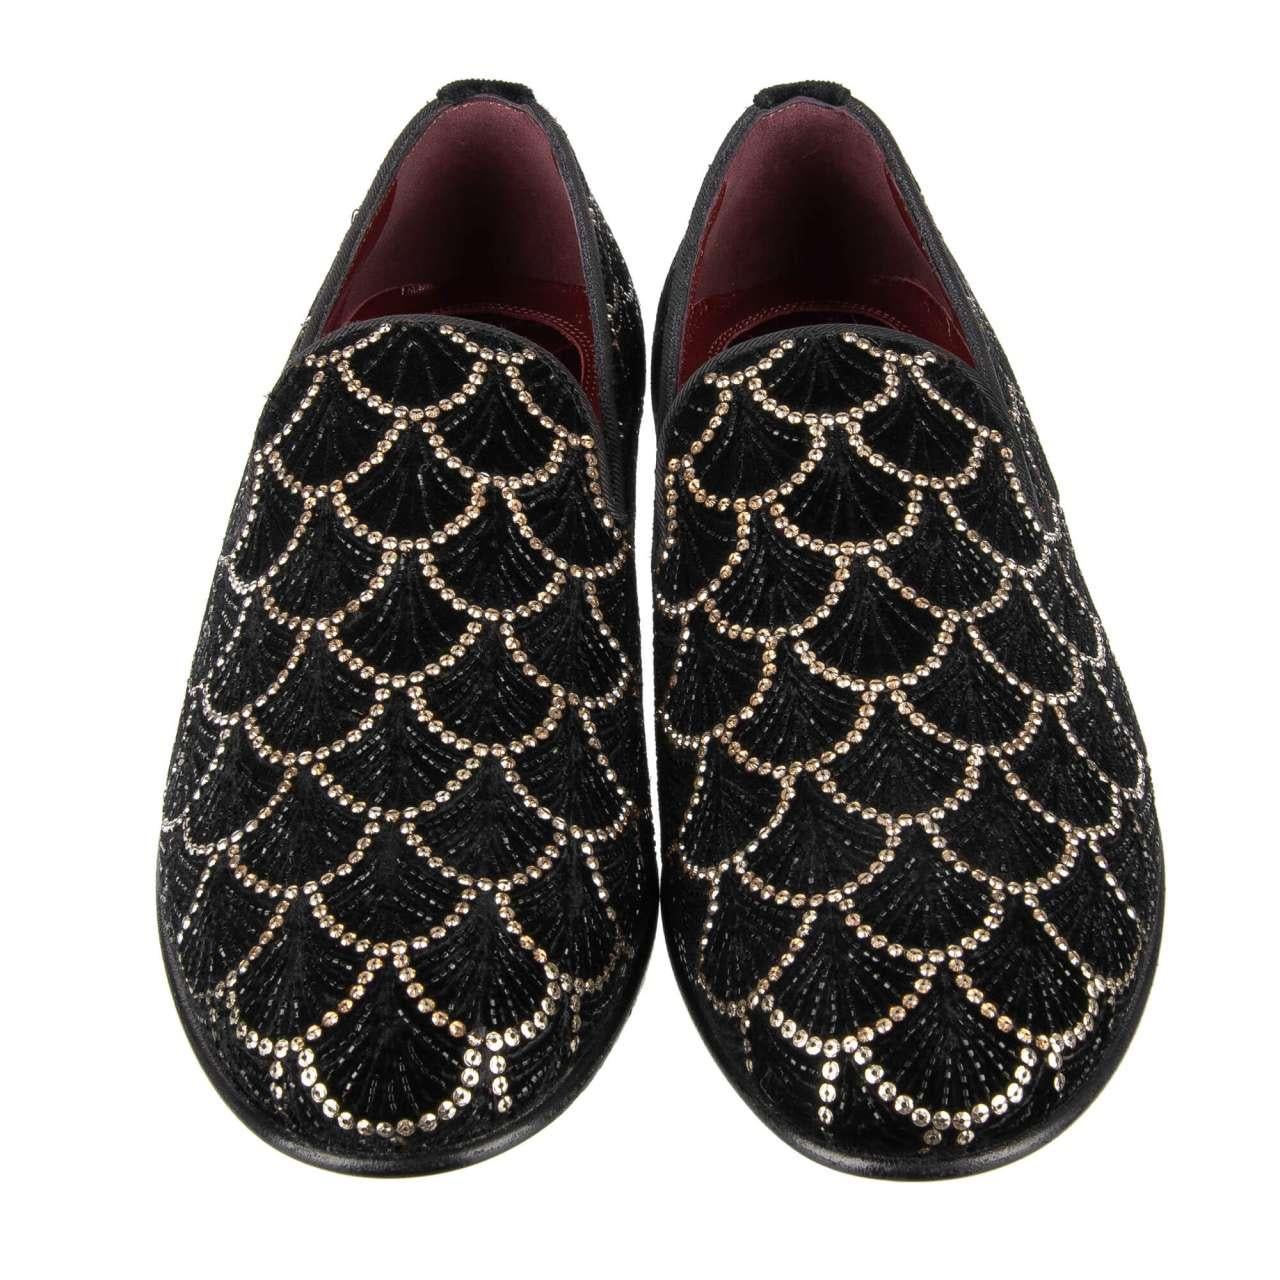 Dolce & Gabbana Crystals Embroidered Loafer Shoes ISPICA Black Gold EUR 42 For Sale 1